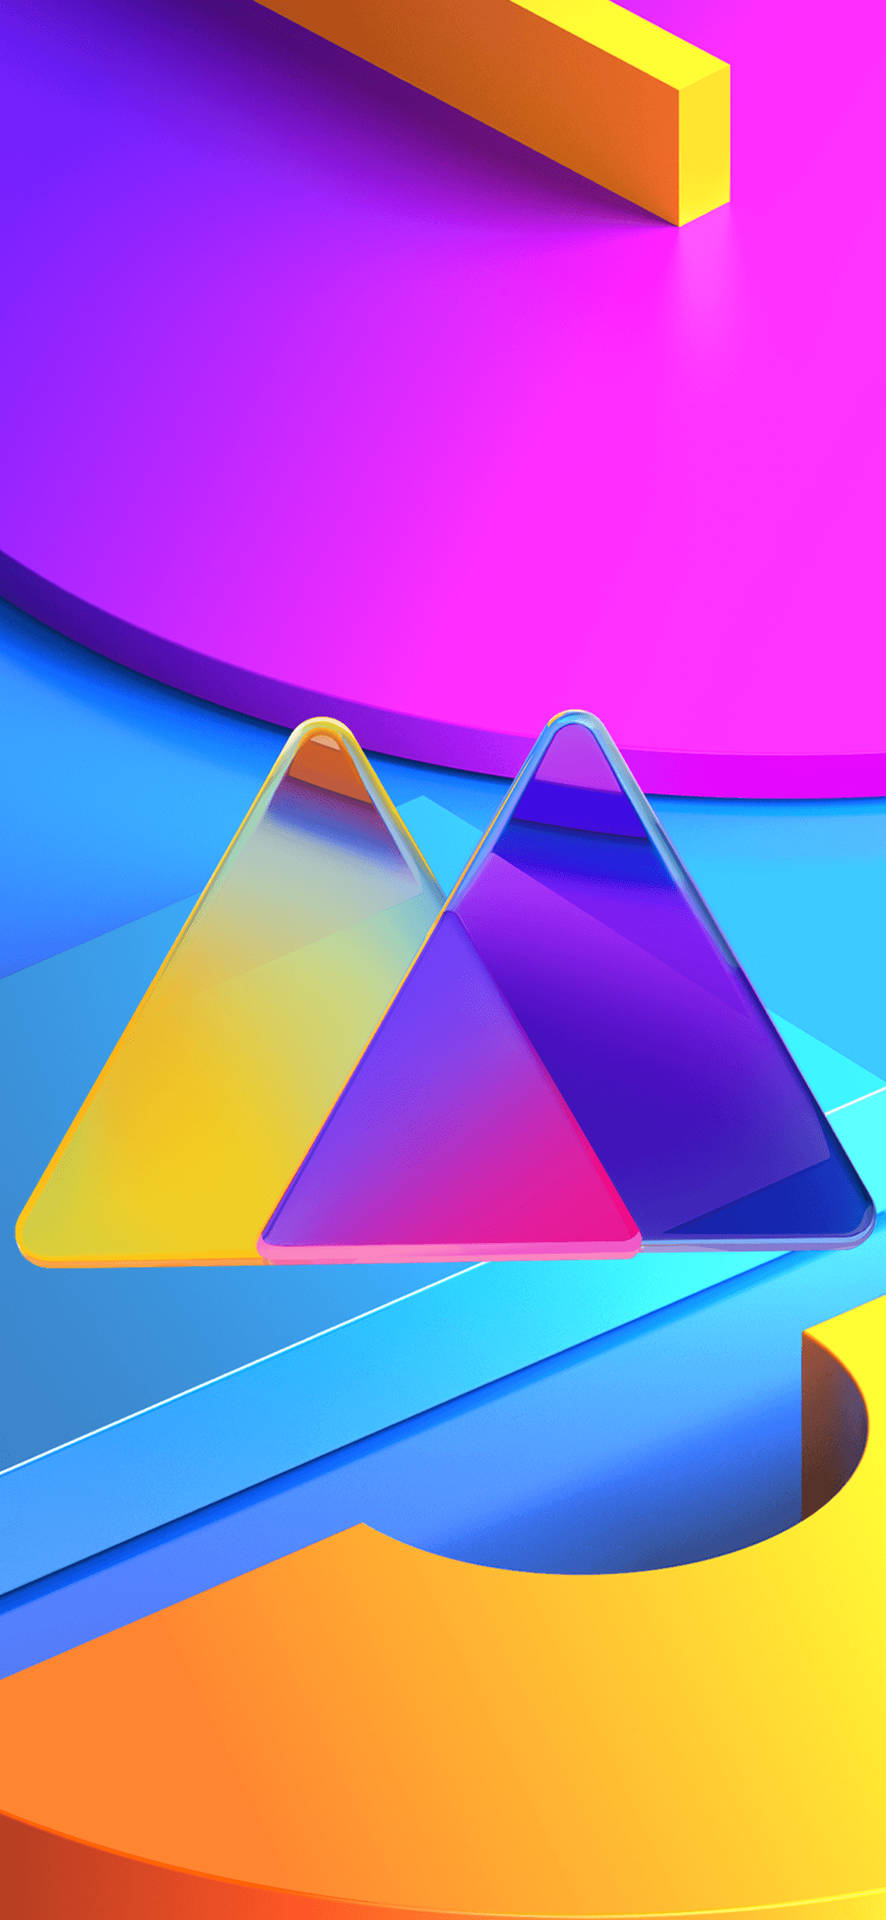 Samsung Mobile Abstract Shapes Background